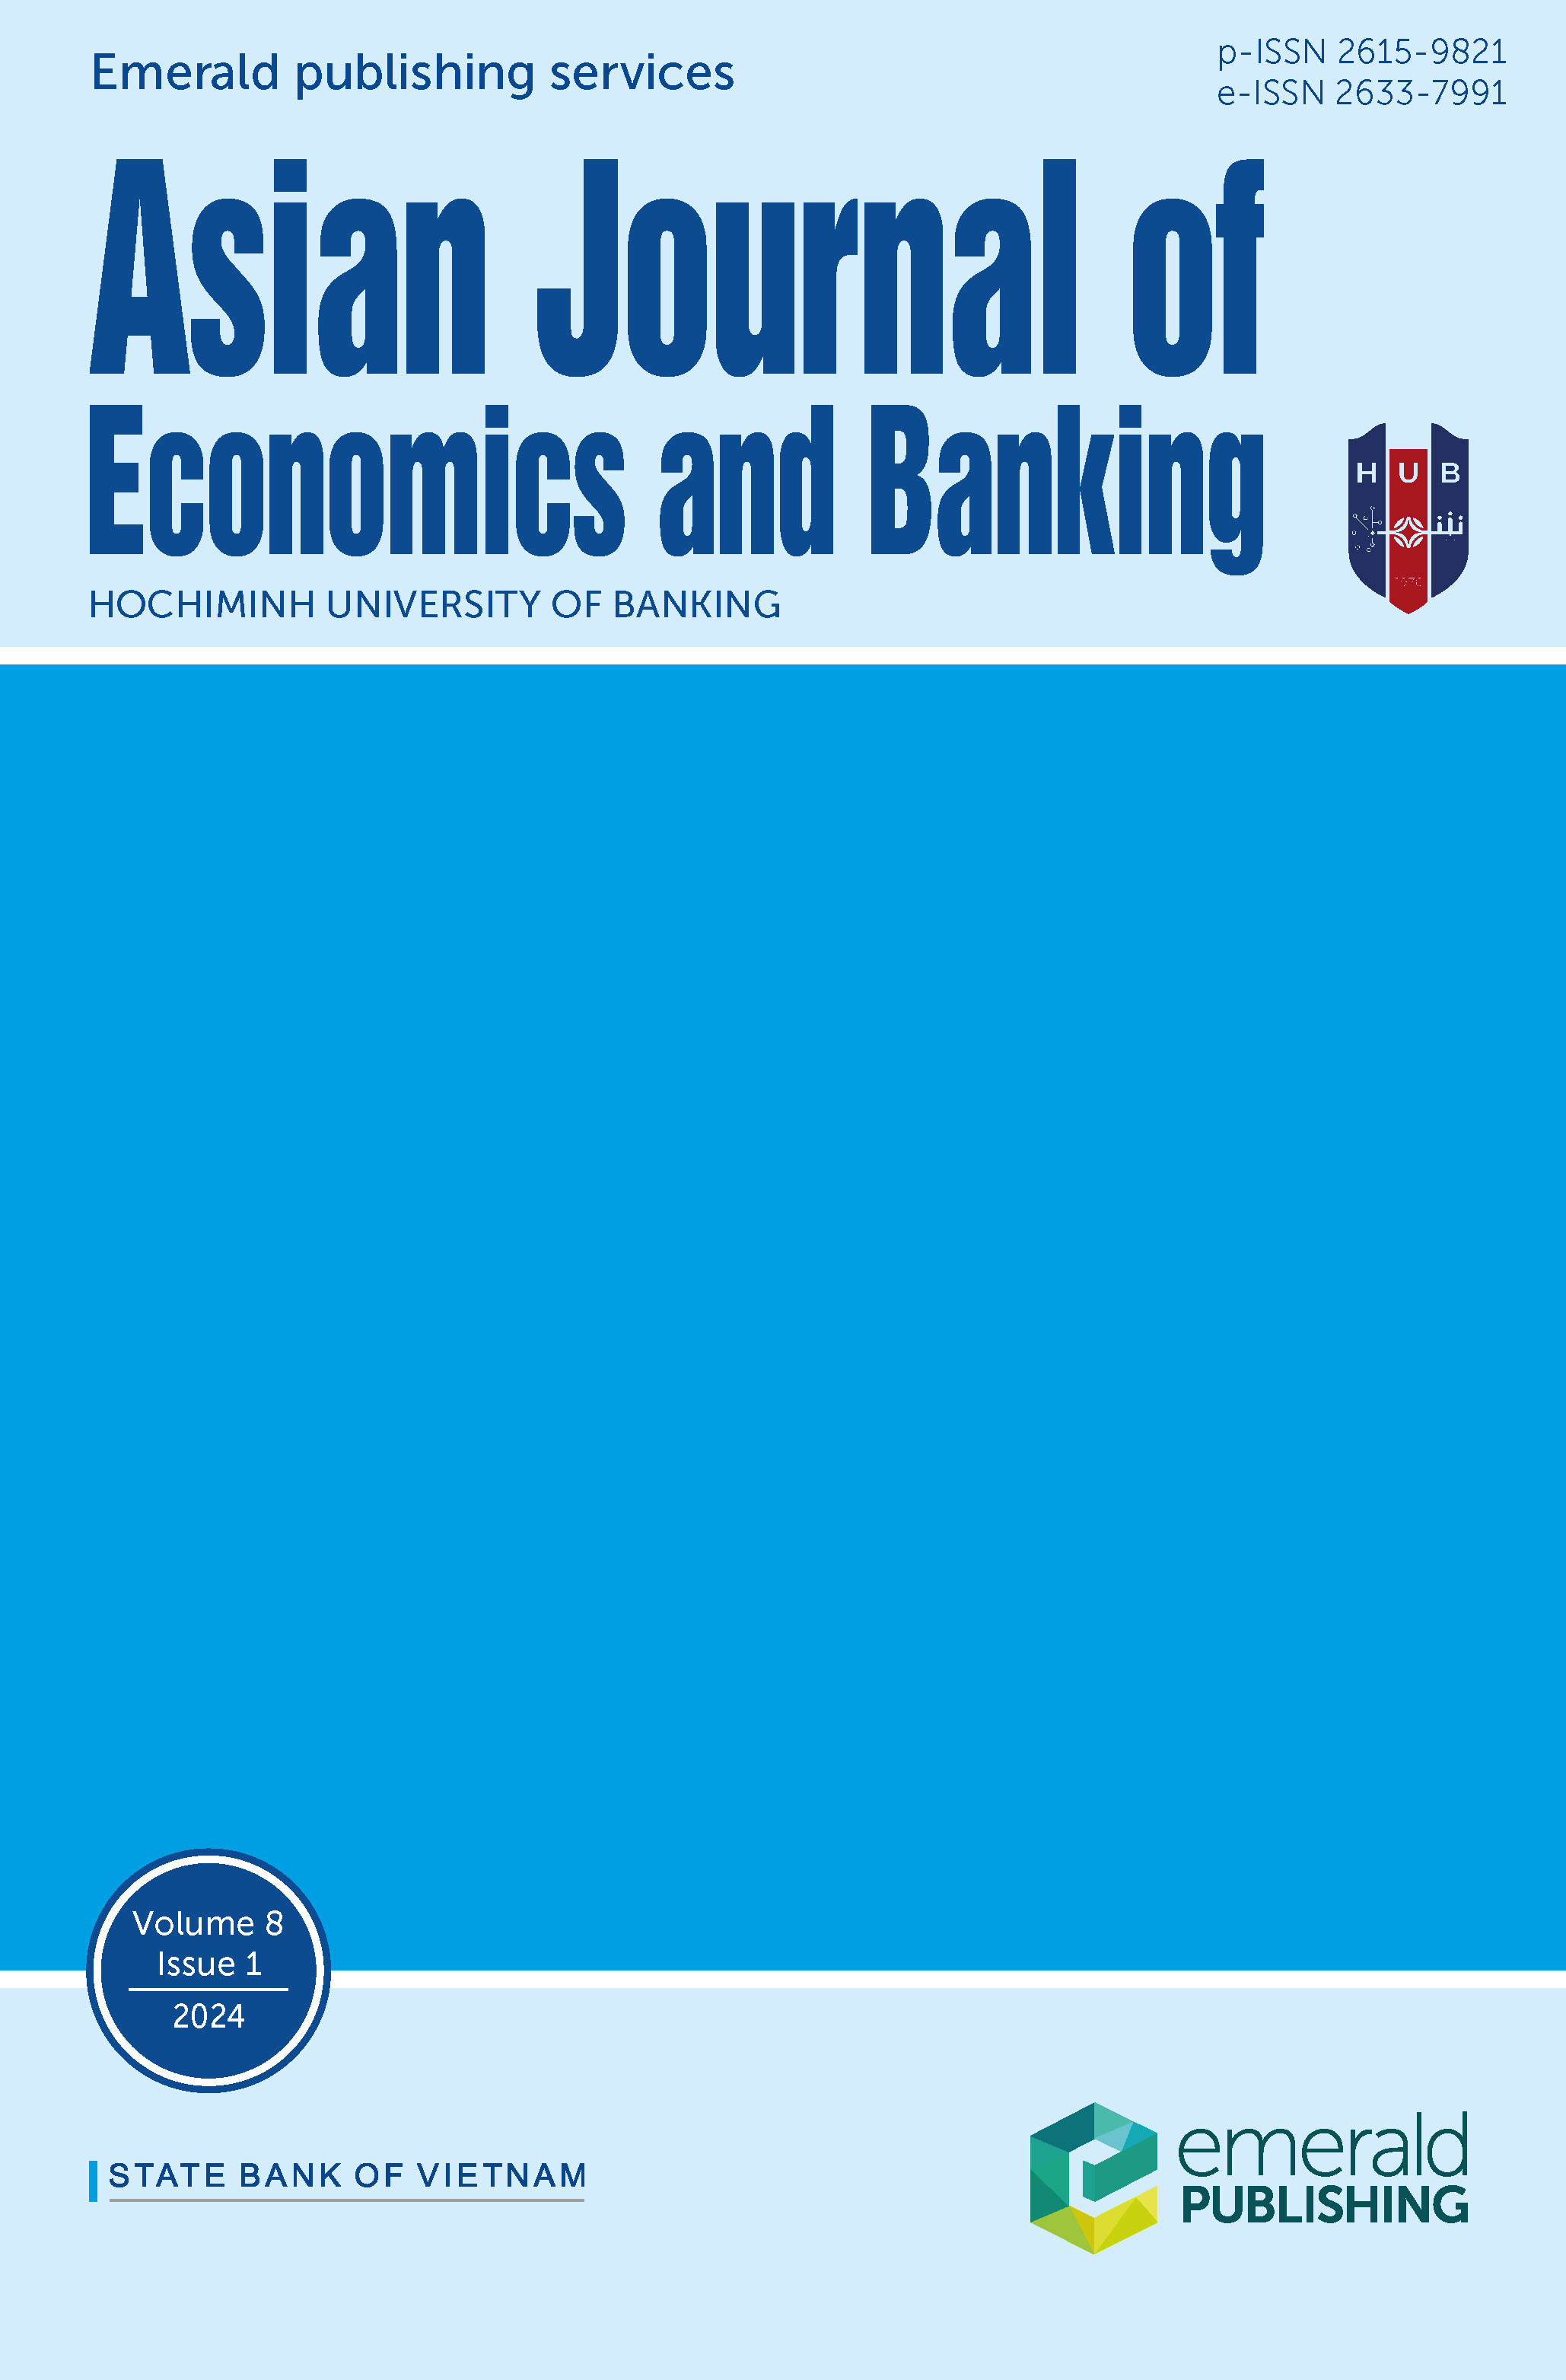 Asian Journal of Economics and Banking